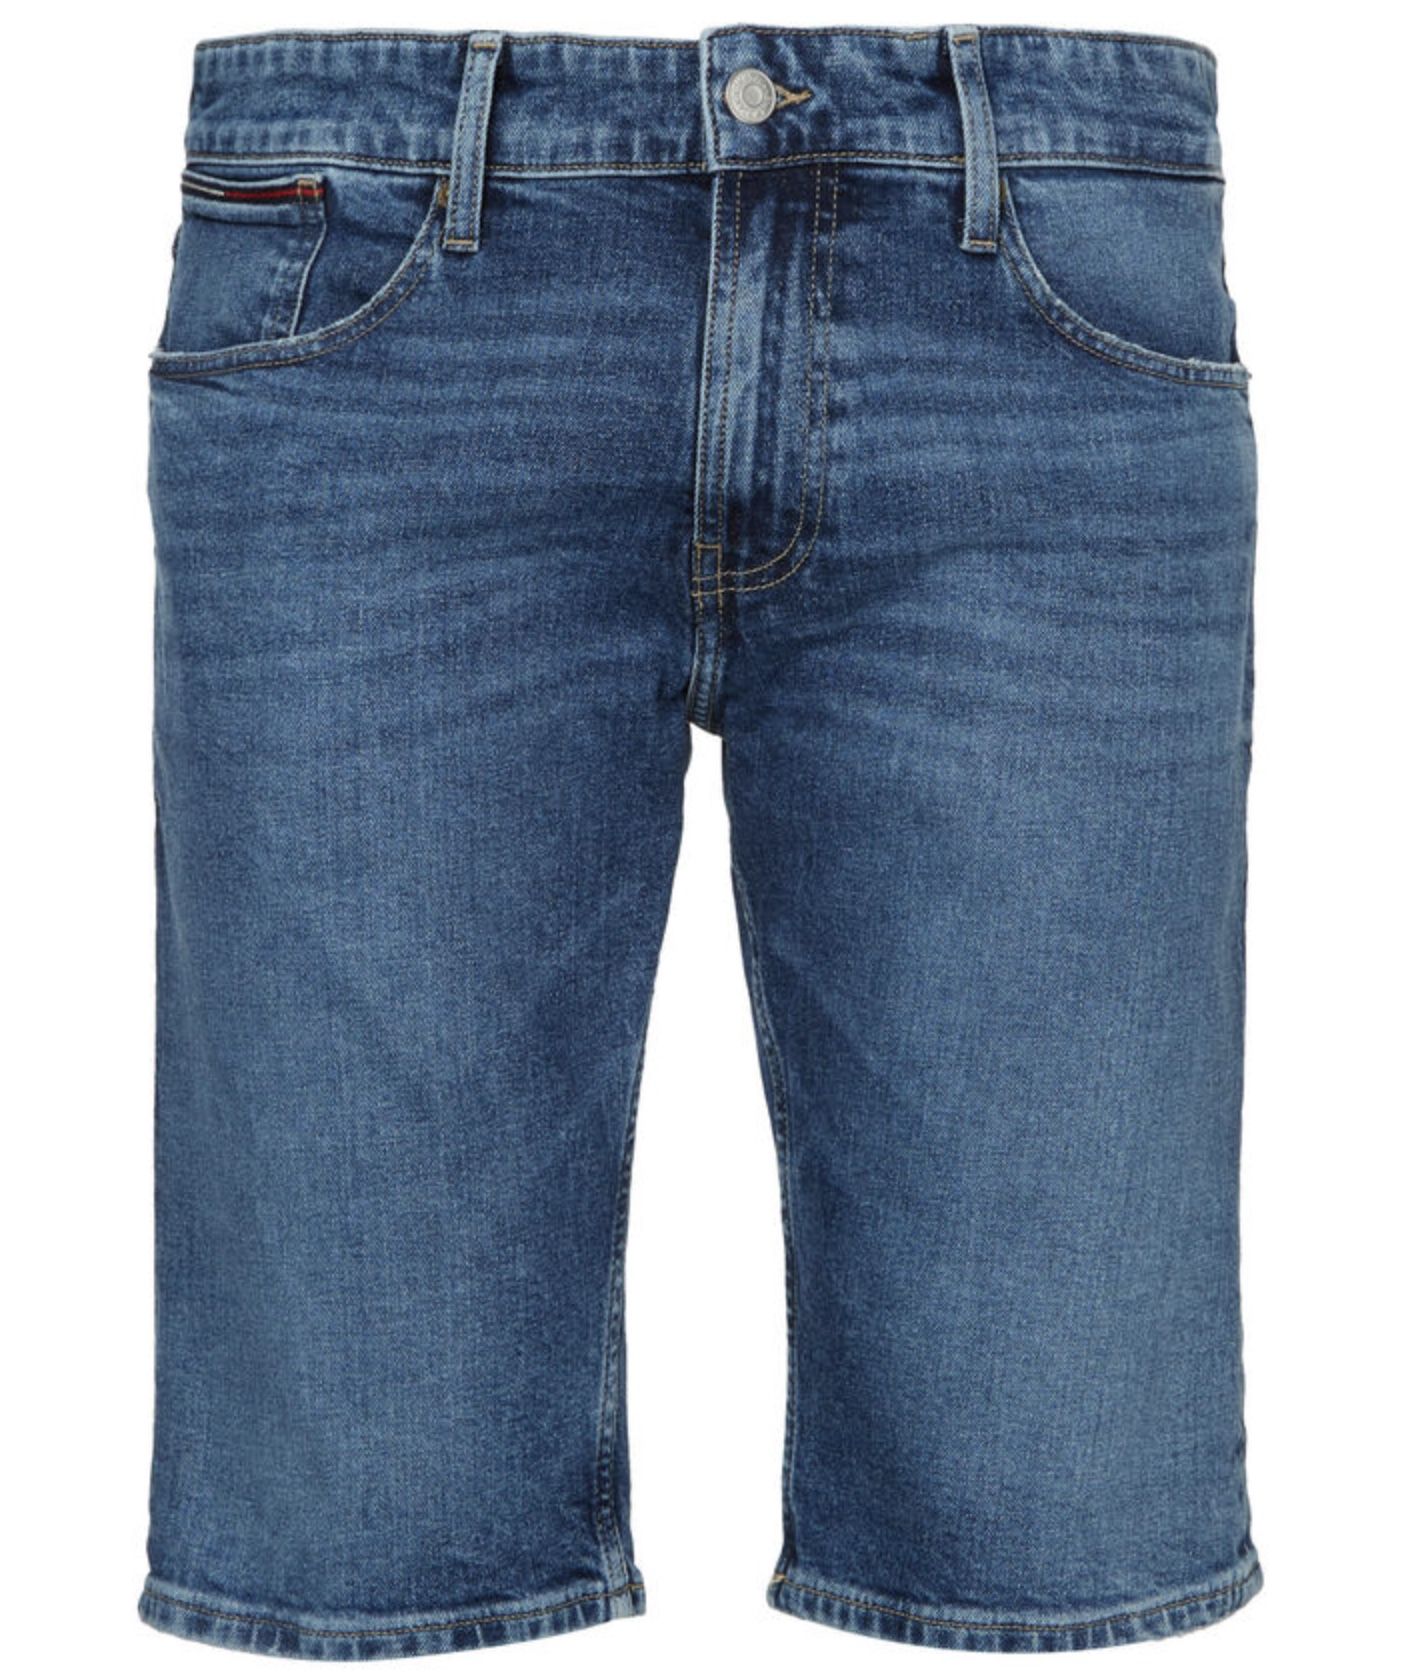 Tommy Jeans Ronnie BF0132 Jeans Shorts für 50,88€ (statt 62€)